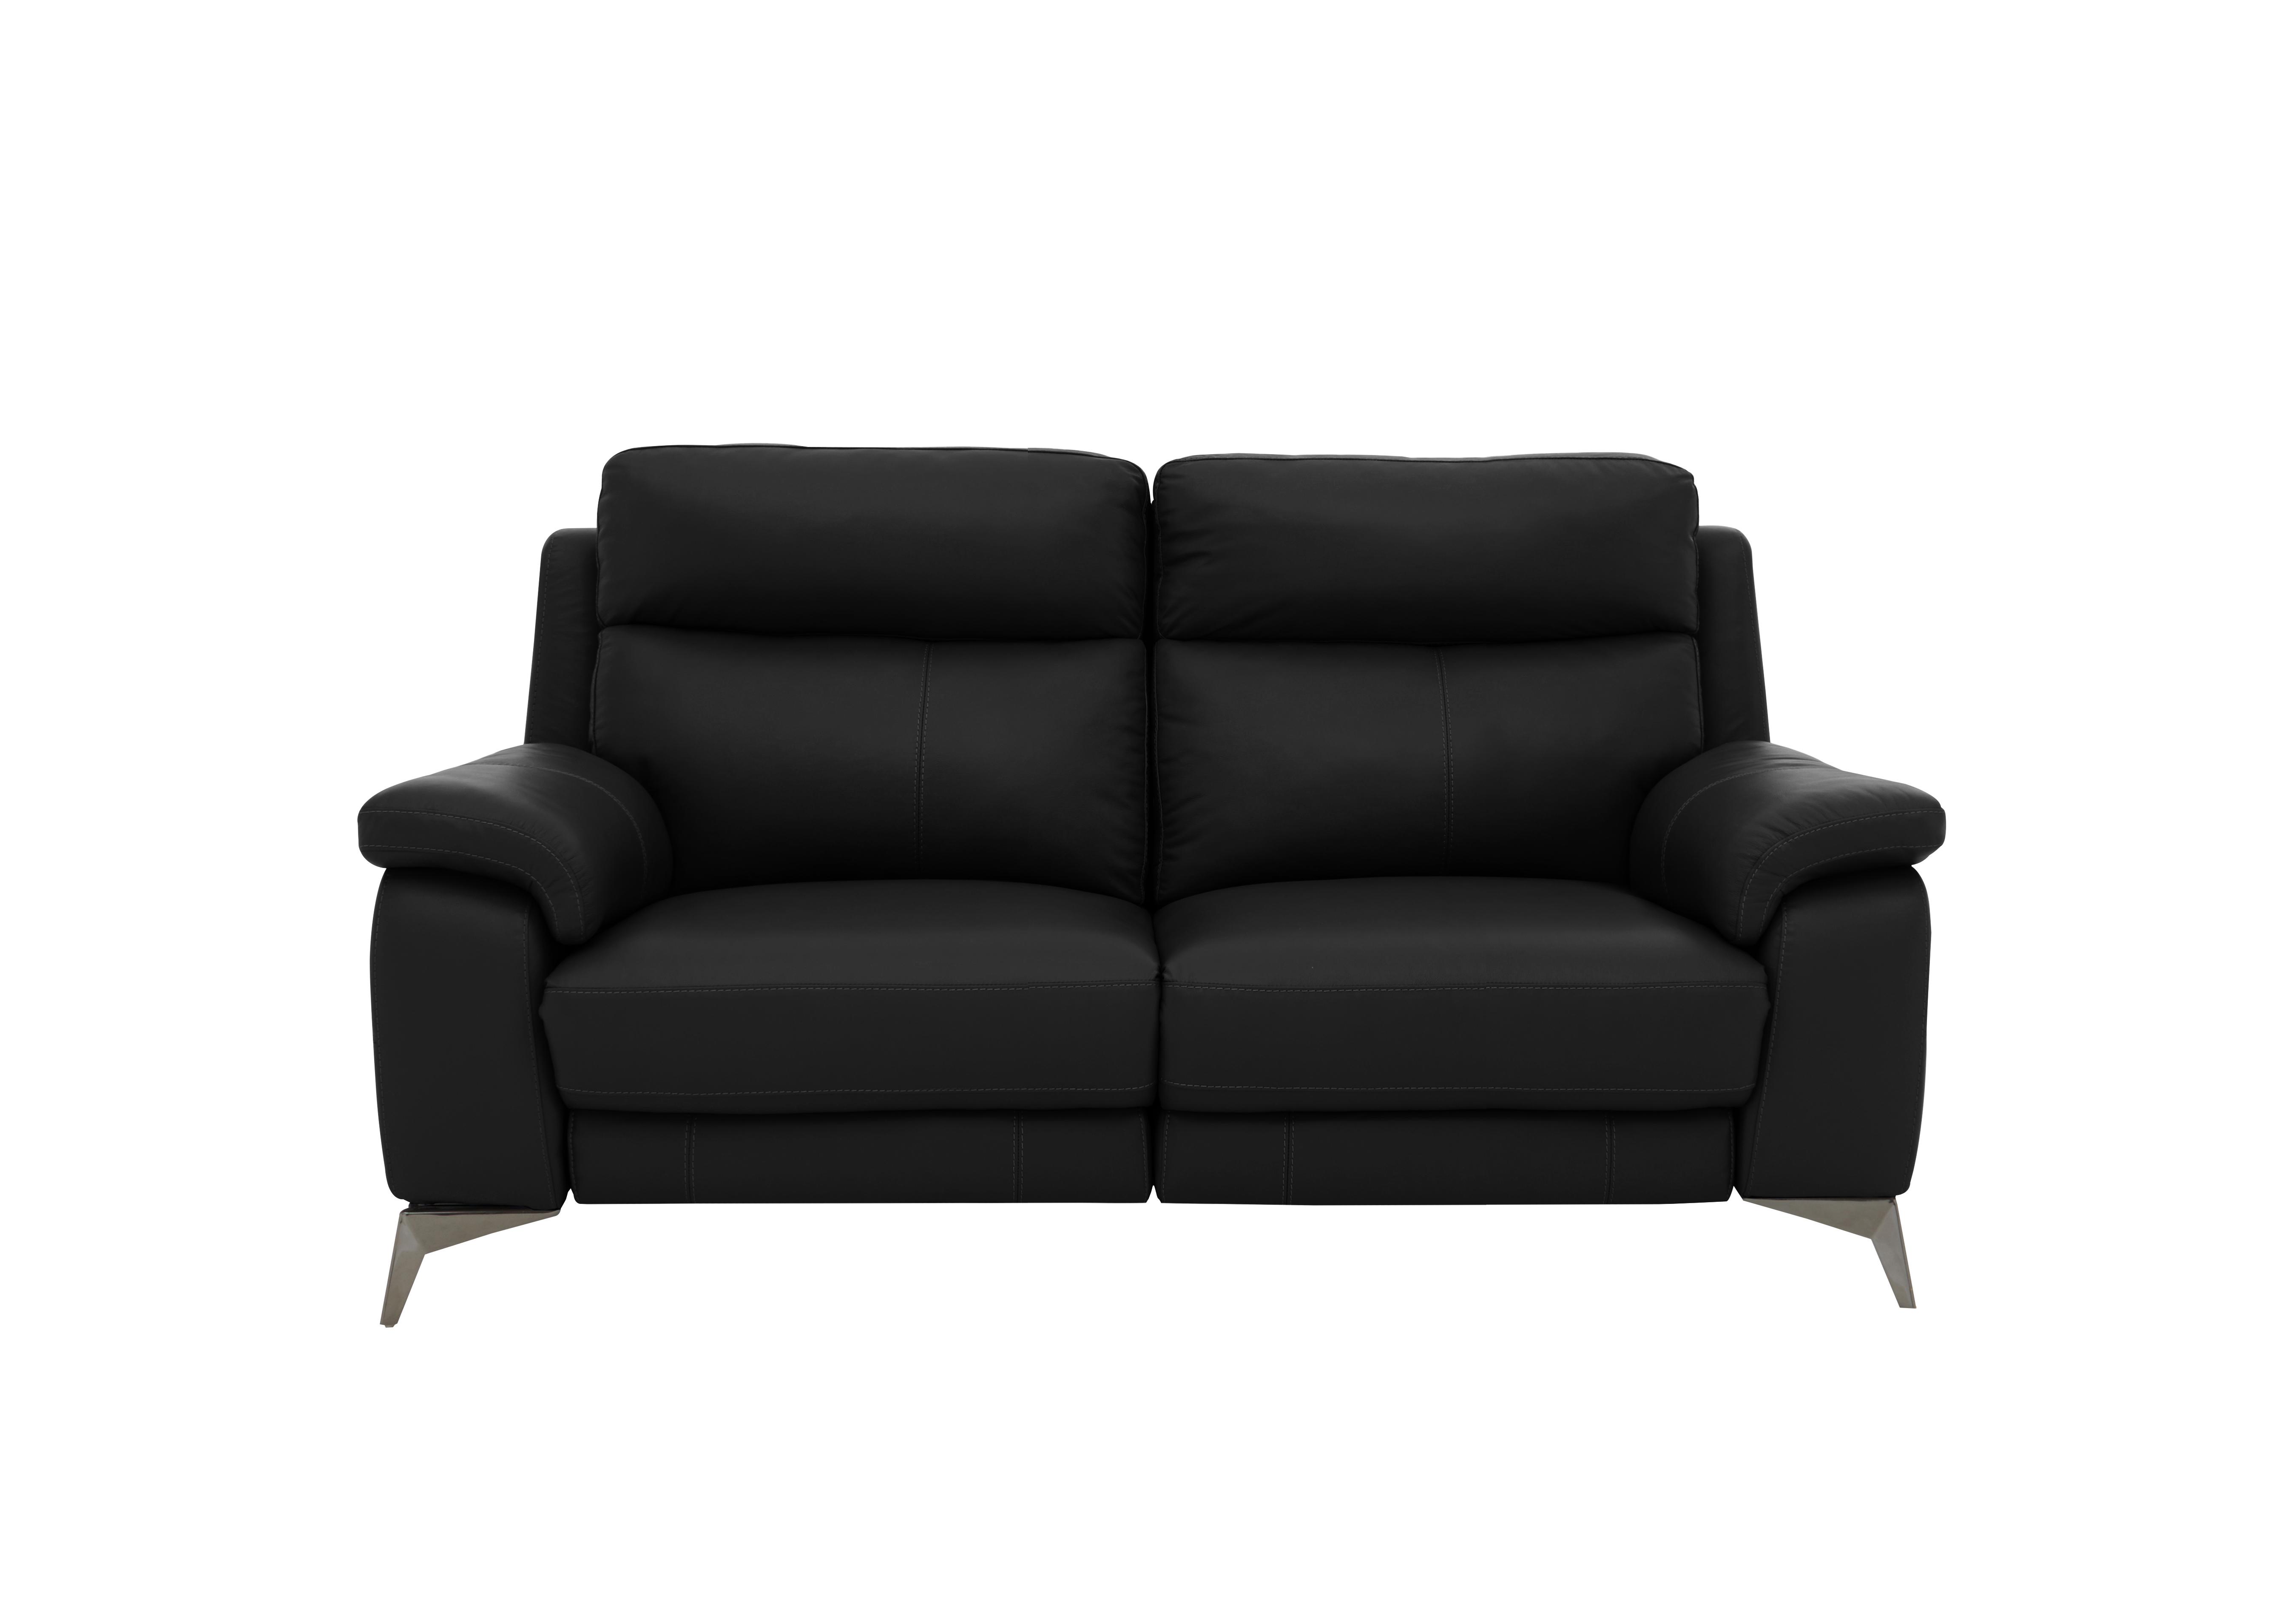 Missouri 2 Seater Leather Recliner Sofa with Power Headrest in Bv-3500 Classic Black on Furniture Village